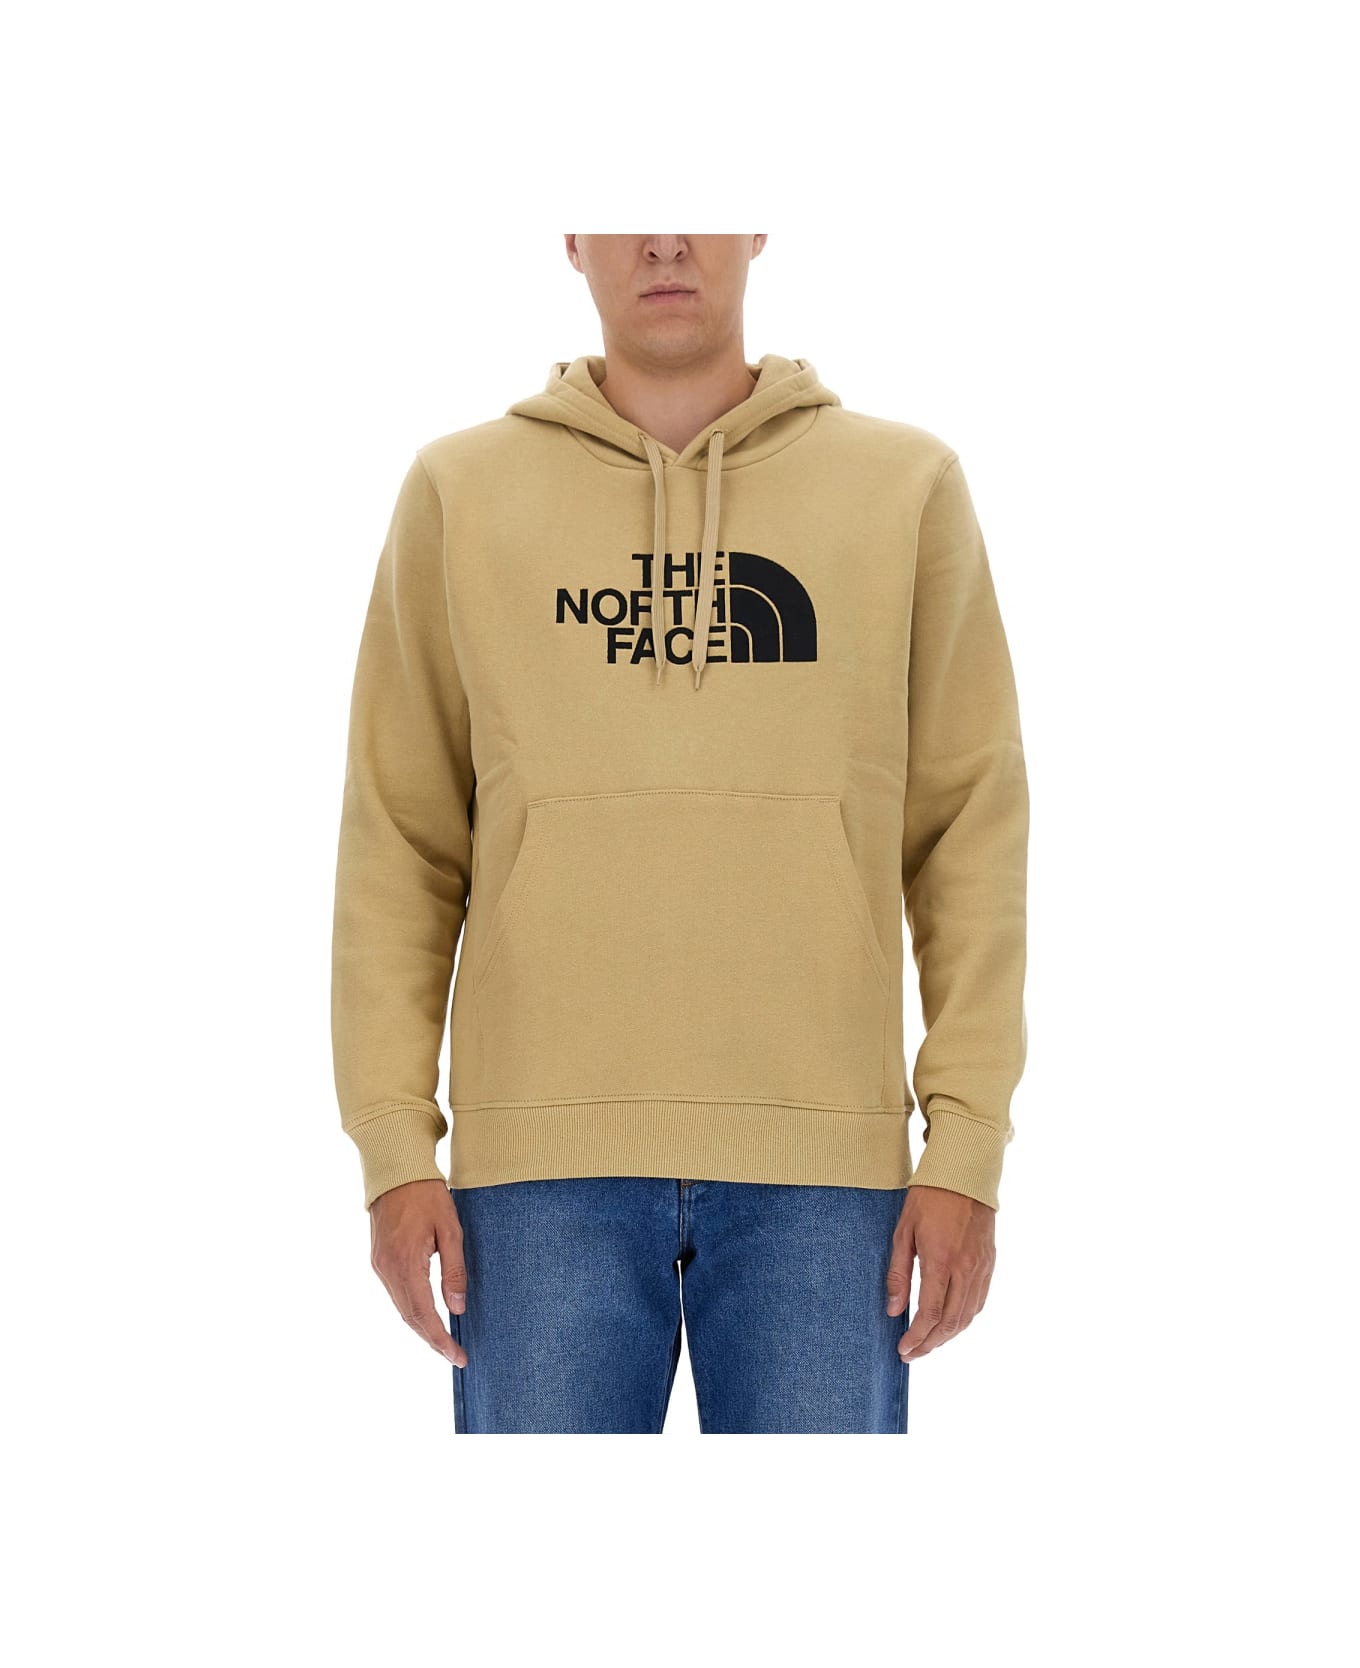 The North Face Sweatshirt With Logo - BEIGE